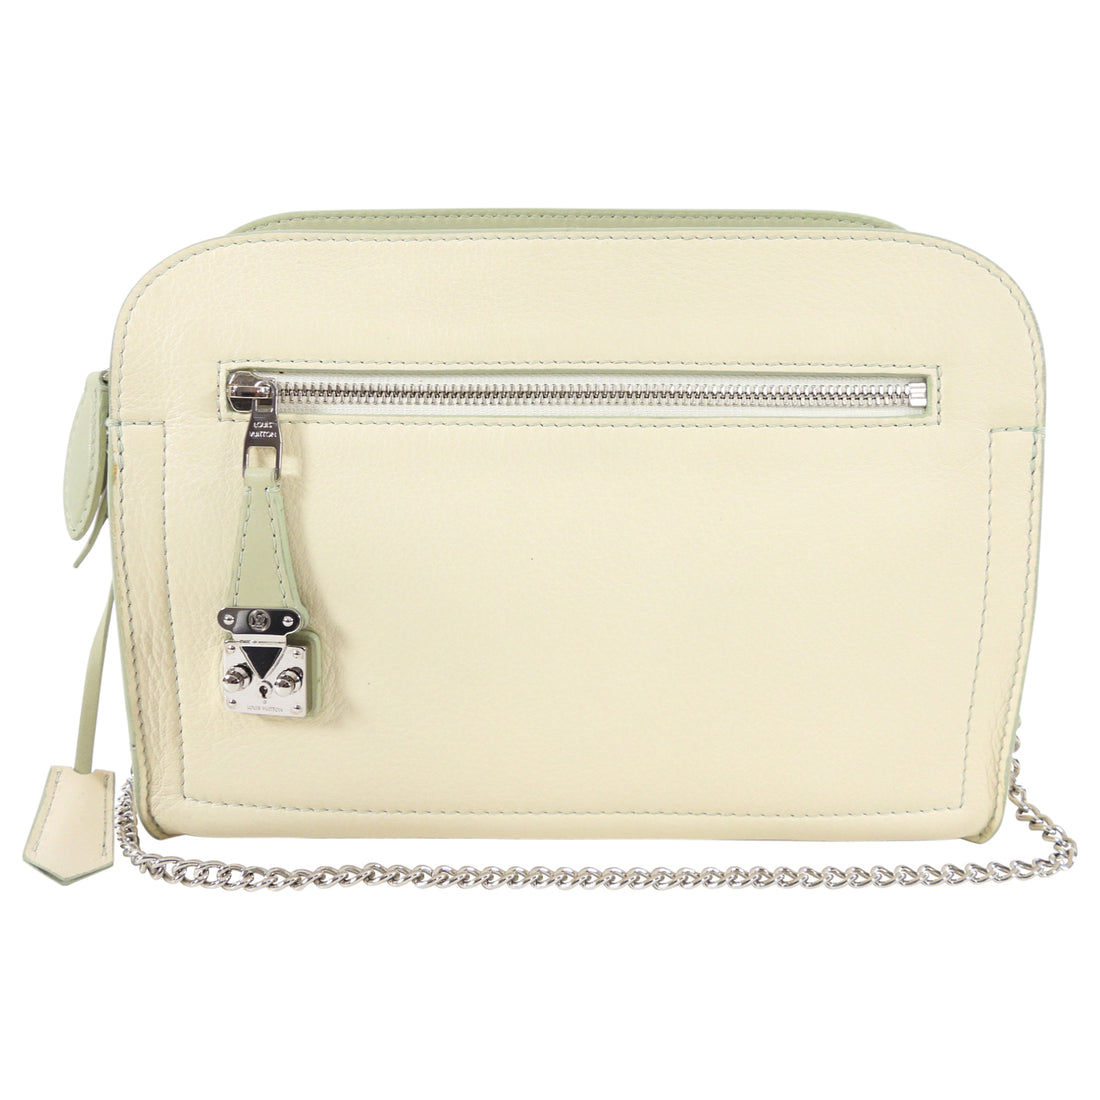 Louis Vuitton 2012 Cruise Ivory and Mint Green Leather Shoulder BagLouis Vuitton 2012 Cruise Ivory and Mint Green Leather Shoulder Bag